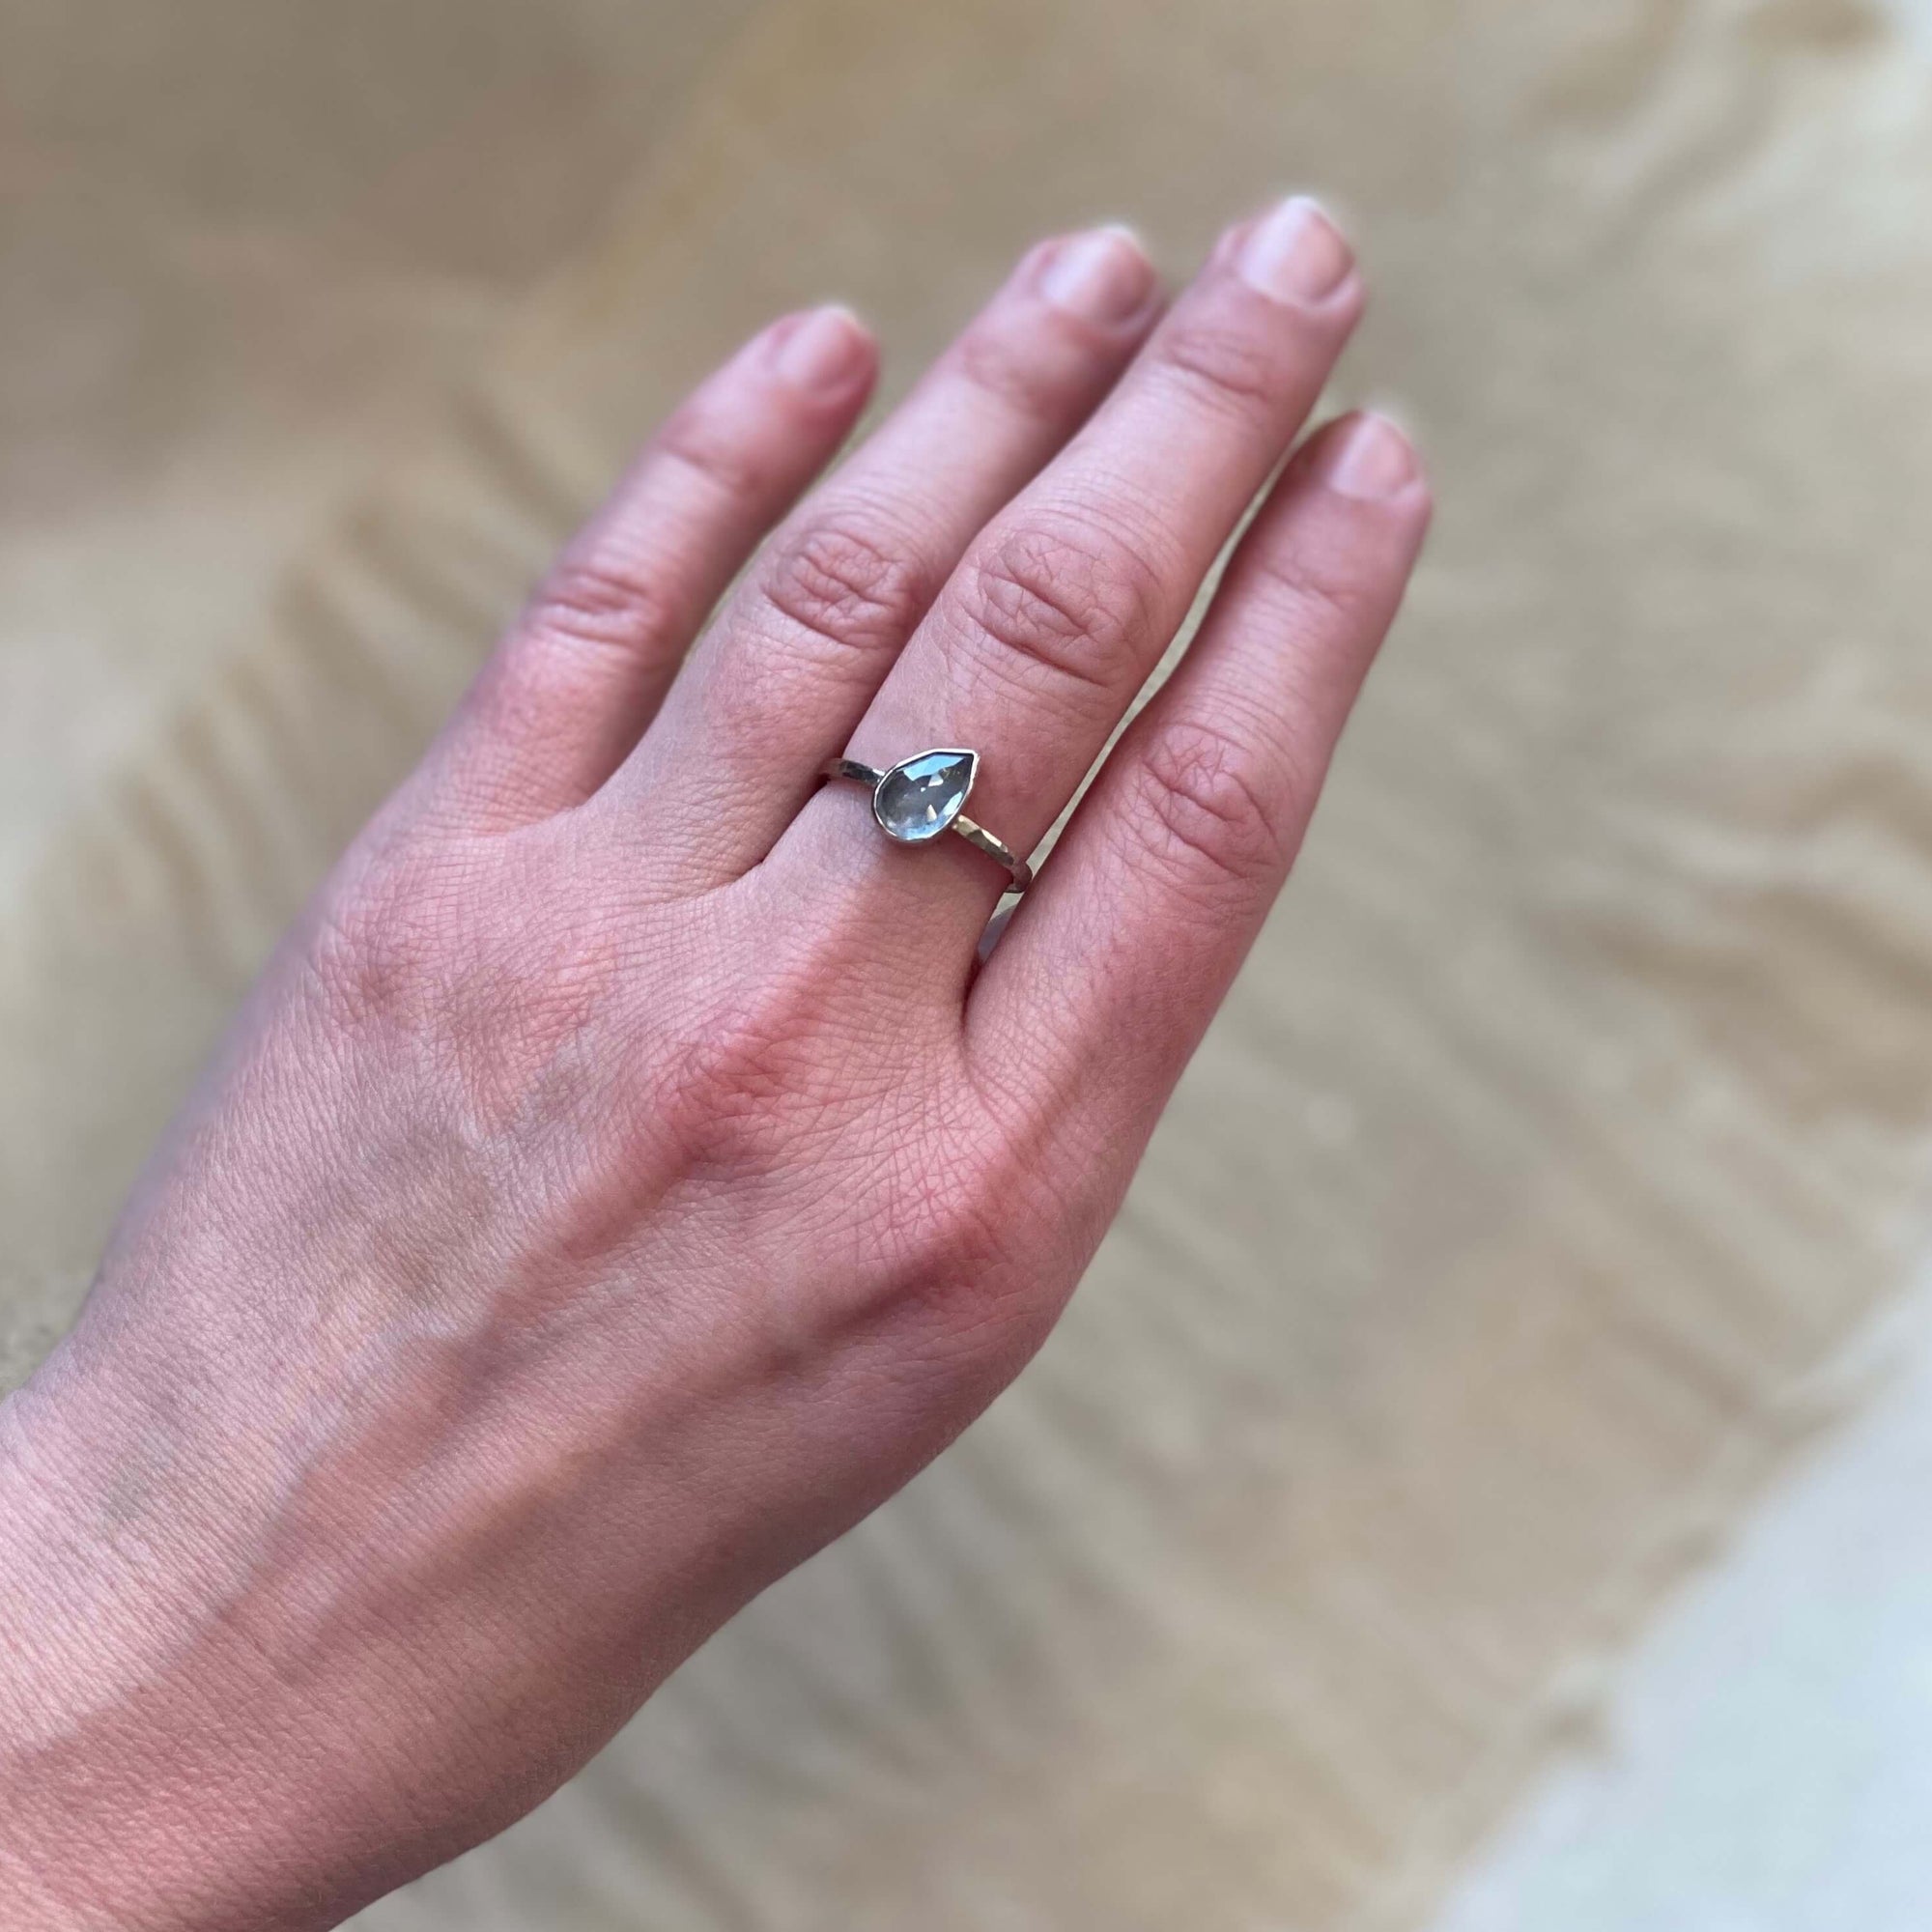 Tilted gray-blue pear shaped sapphire and palladium white gold engagement ring. Handmade with recycled metal and conflict-free stone. EC Design Jewelry in Minneapolis, MN.